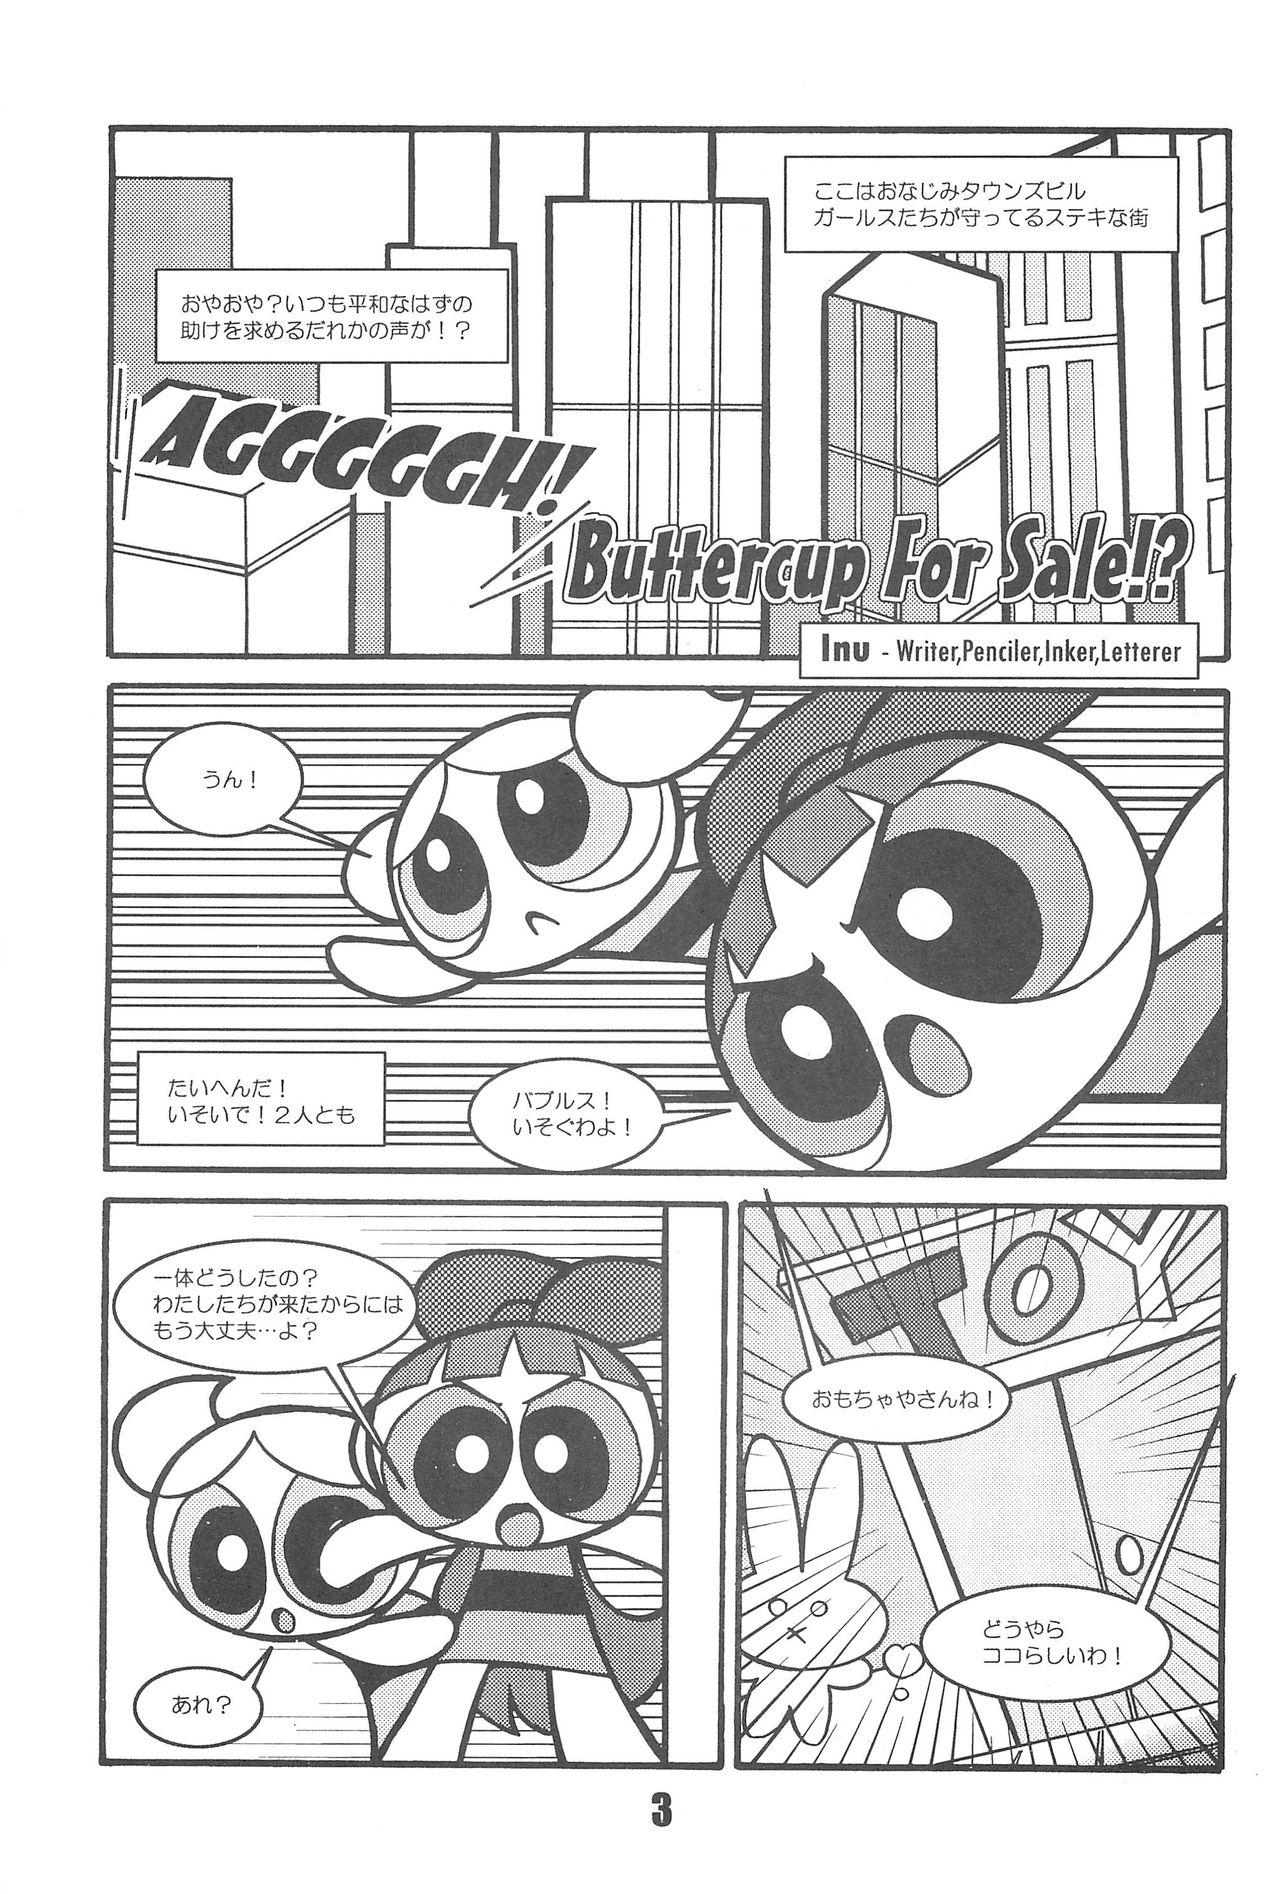 Gangbang Show Goes On! Funhouse 22th - The powerpuff girls Monstercock - Page 3